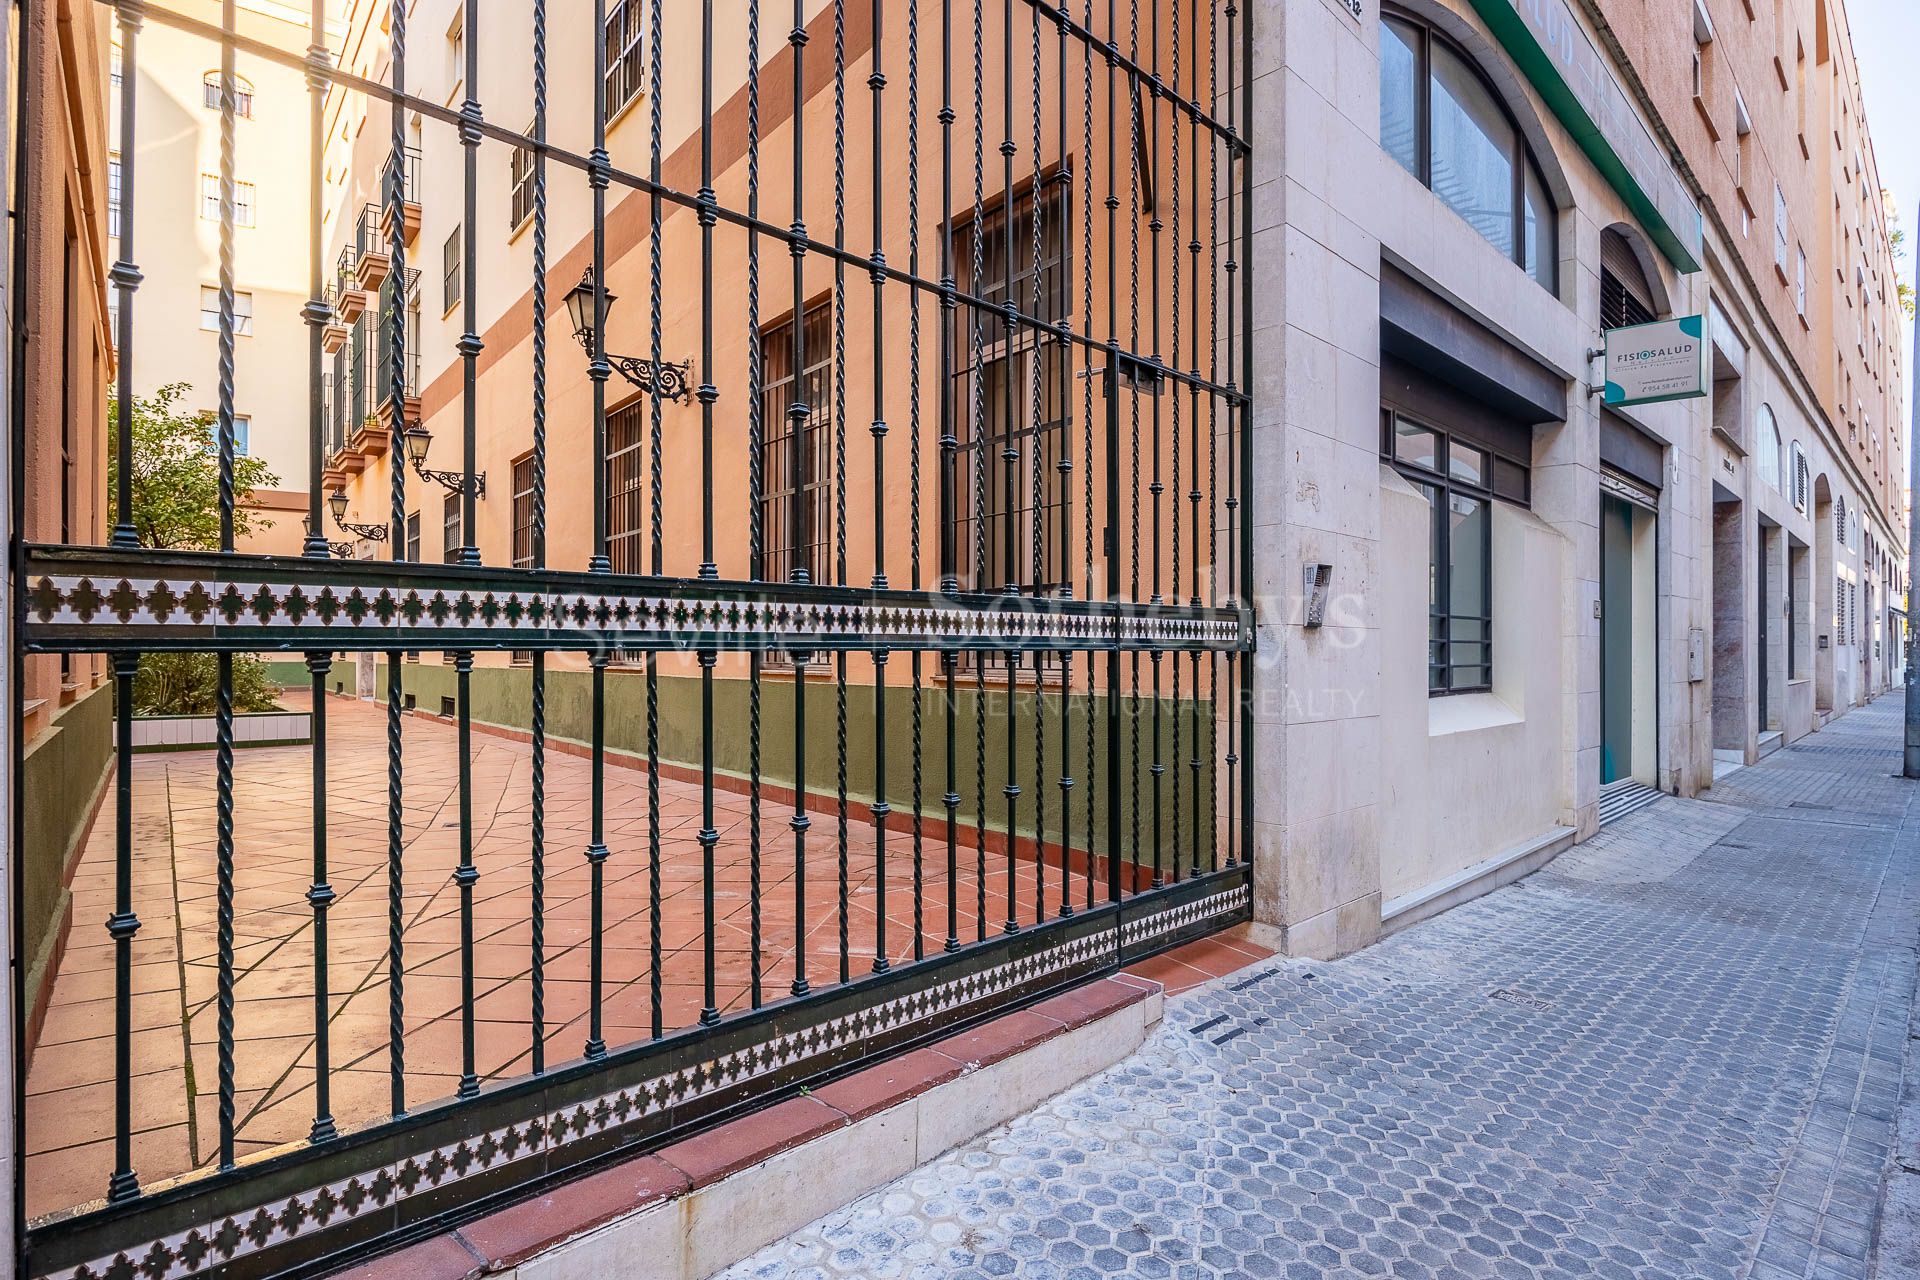 Profitable real estate asset in the commercial heart of Seville.